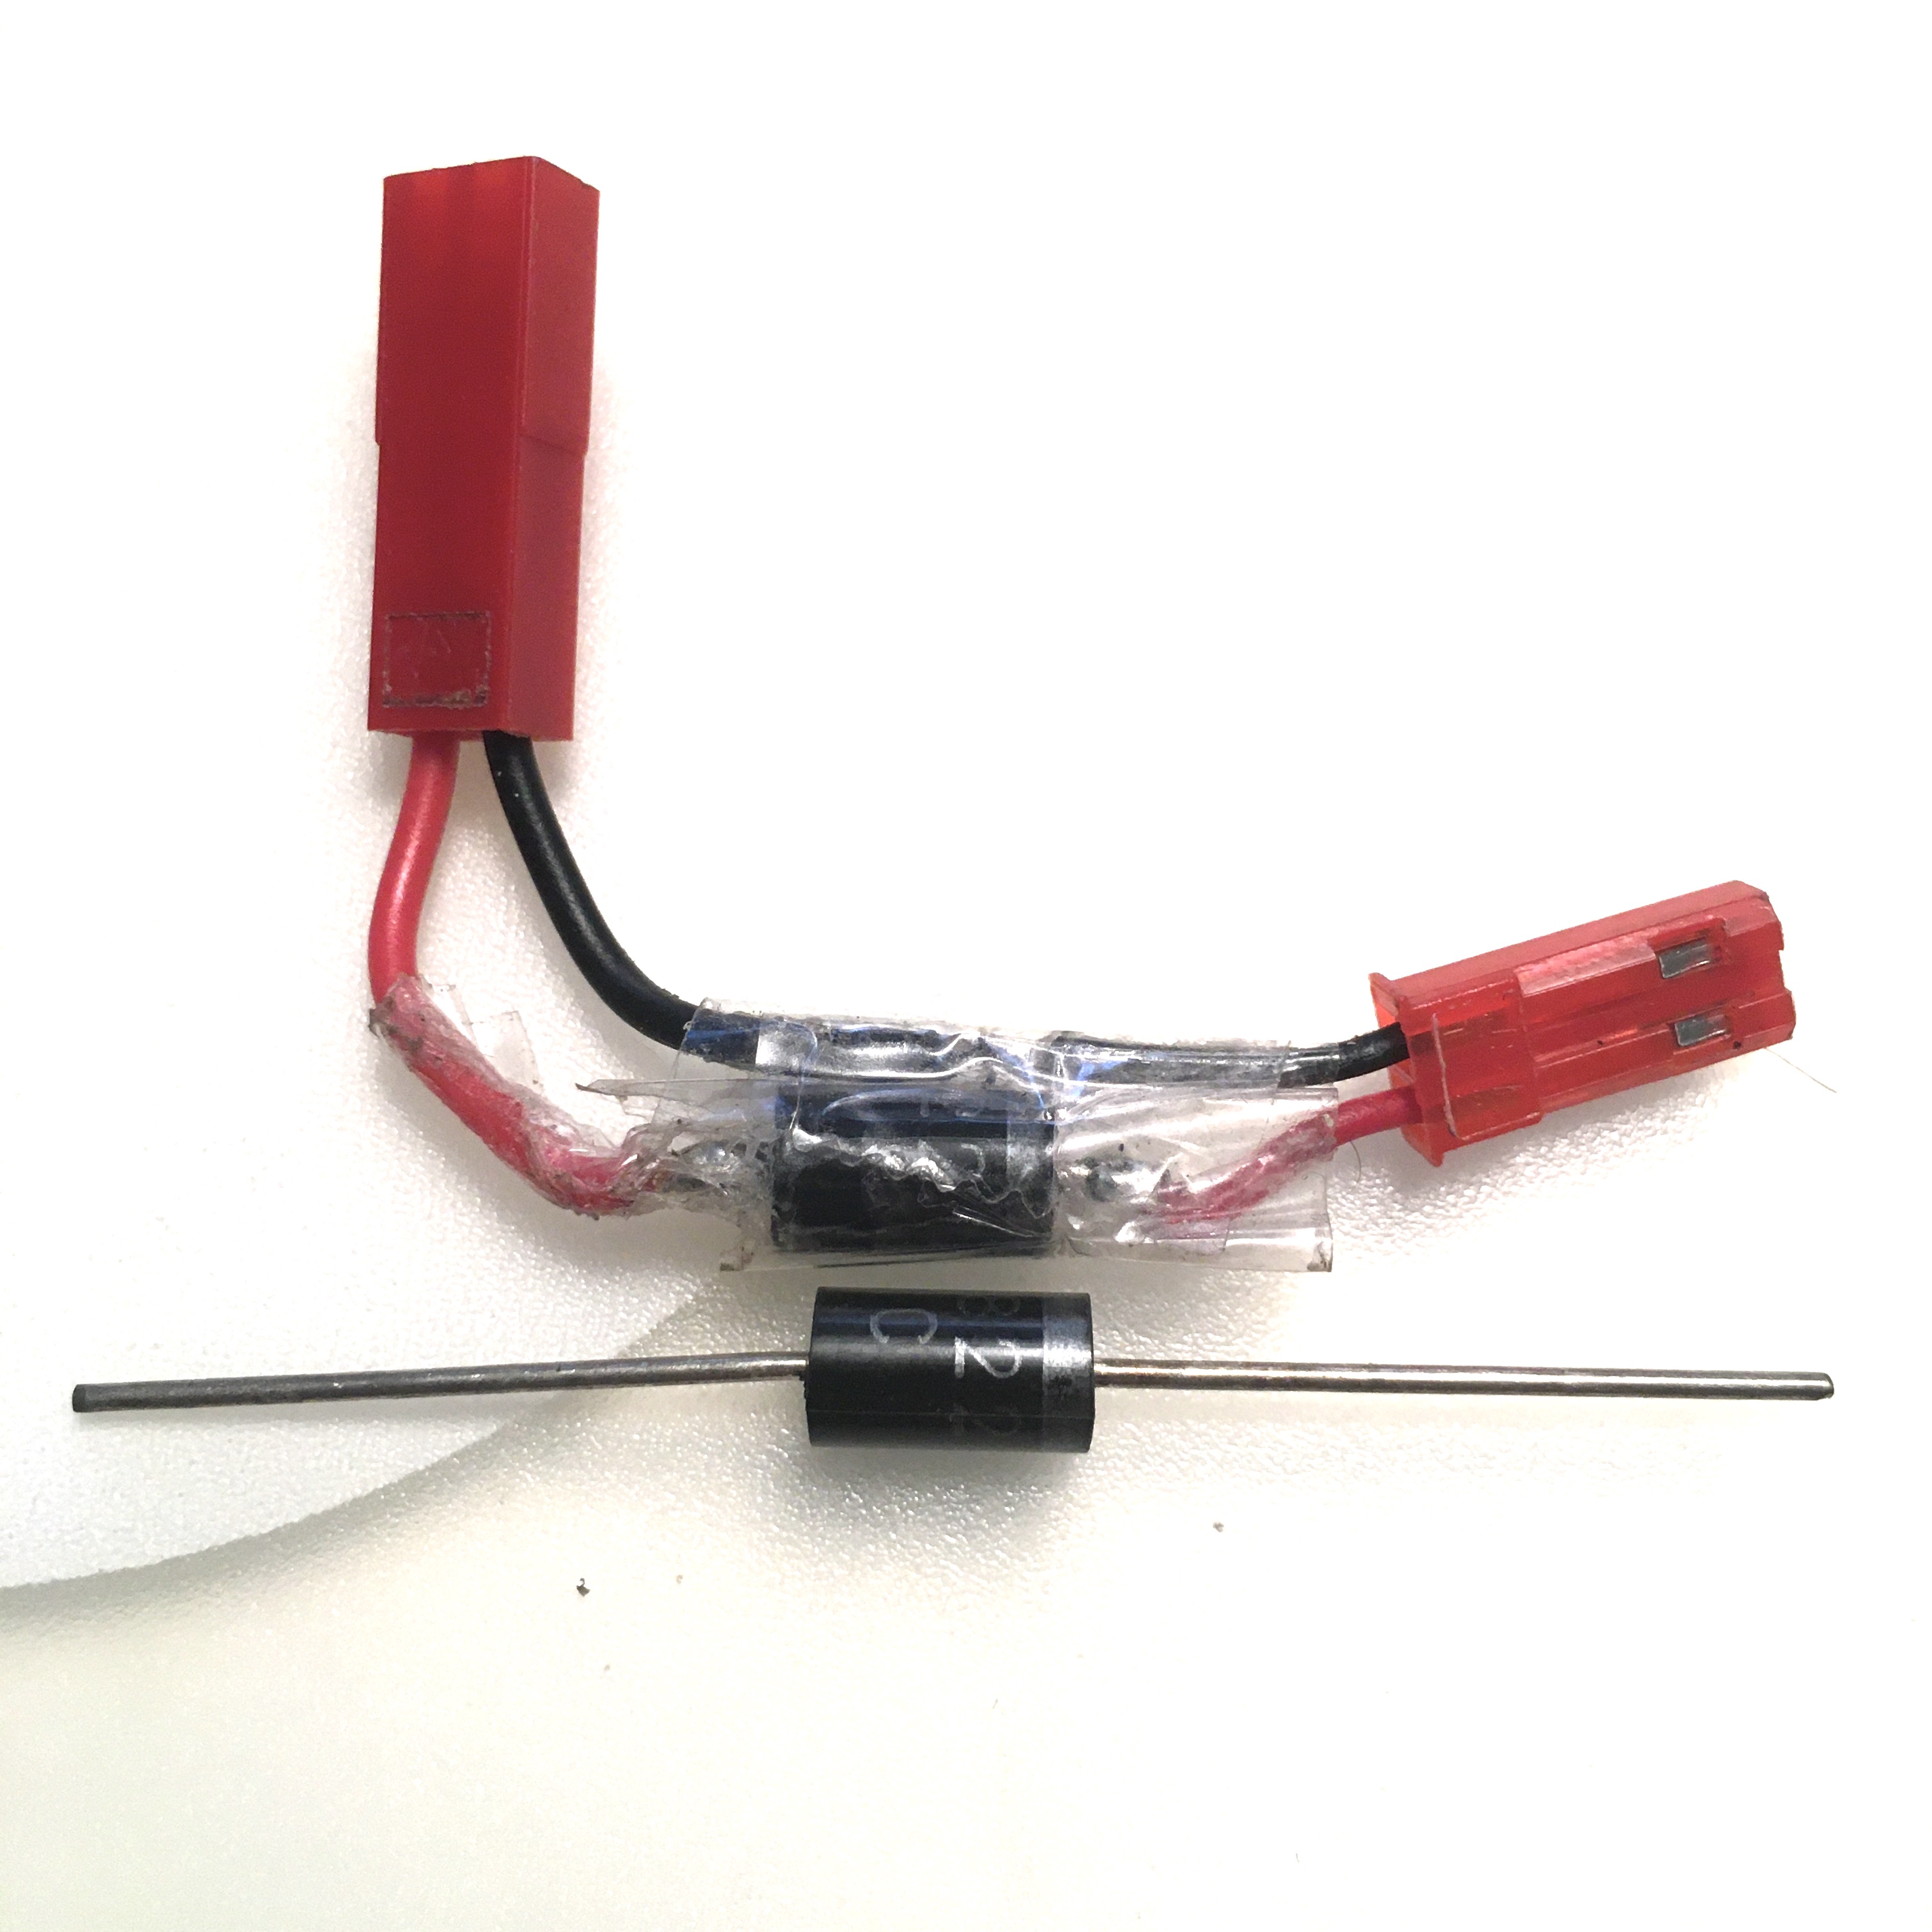 1 diode voltage drop. Anode goes to source + (Lipo RED), Cathode goes to load side -Black.